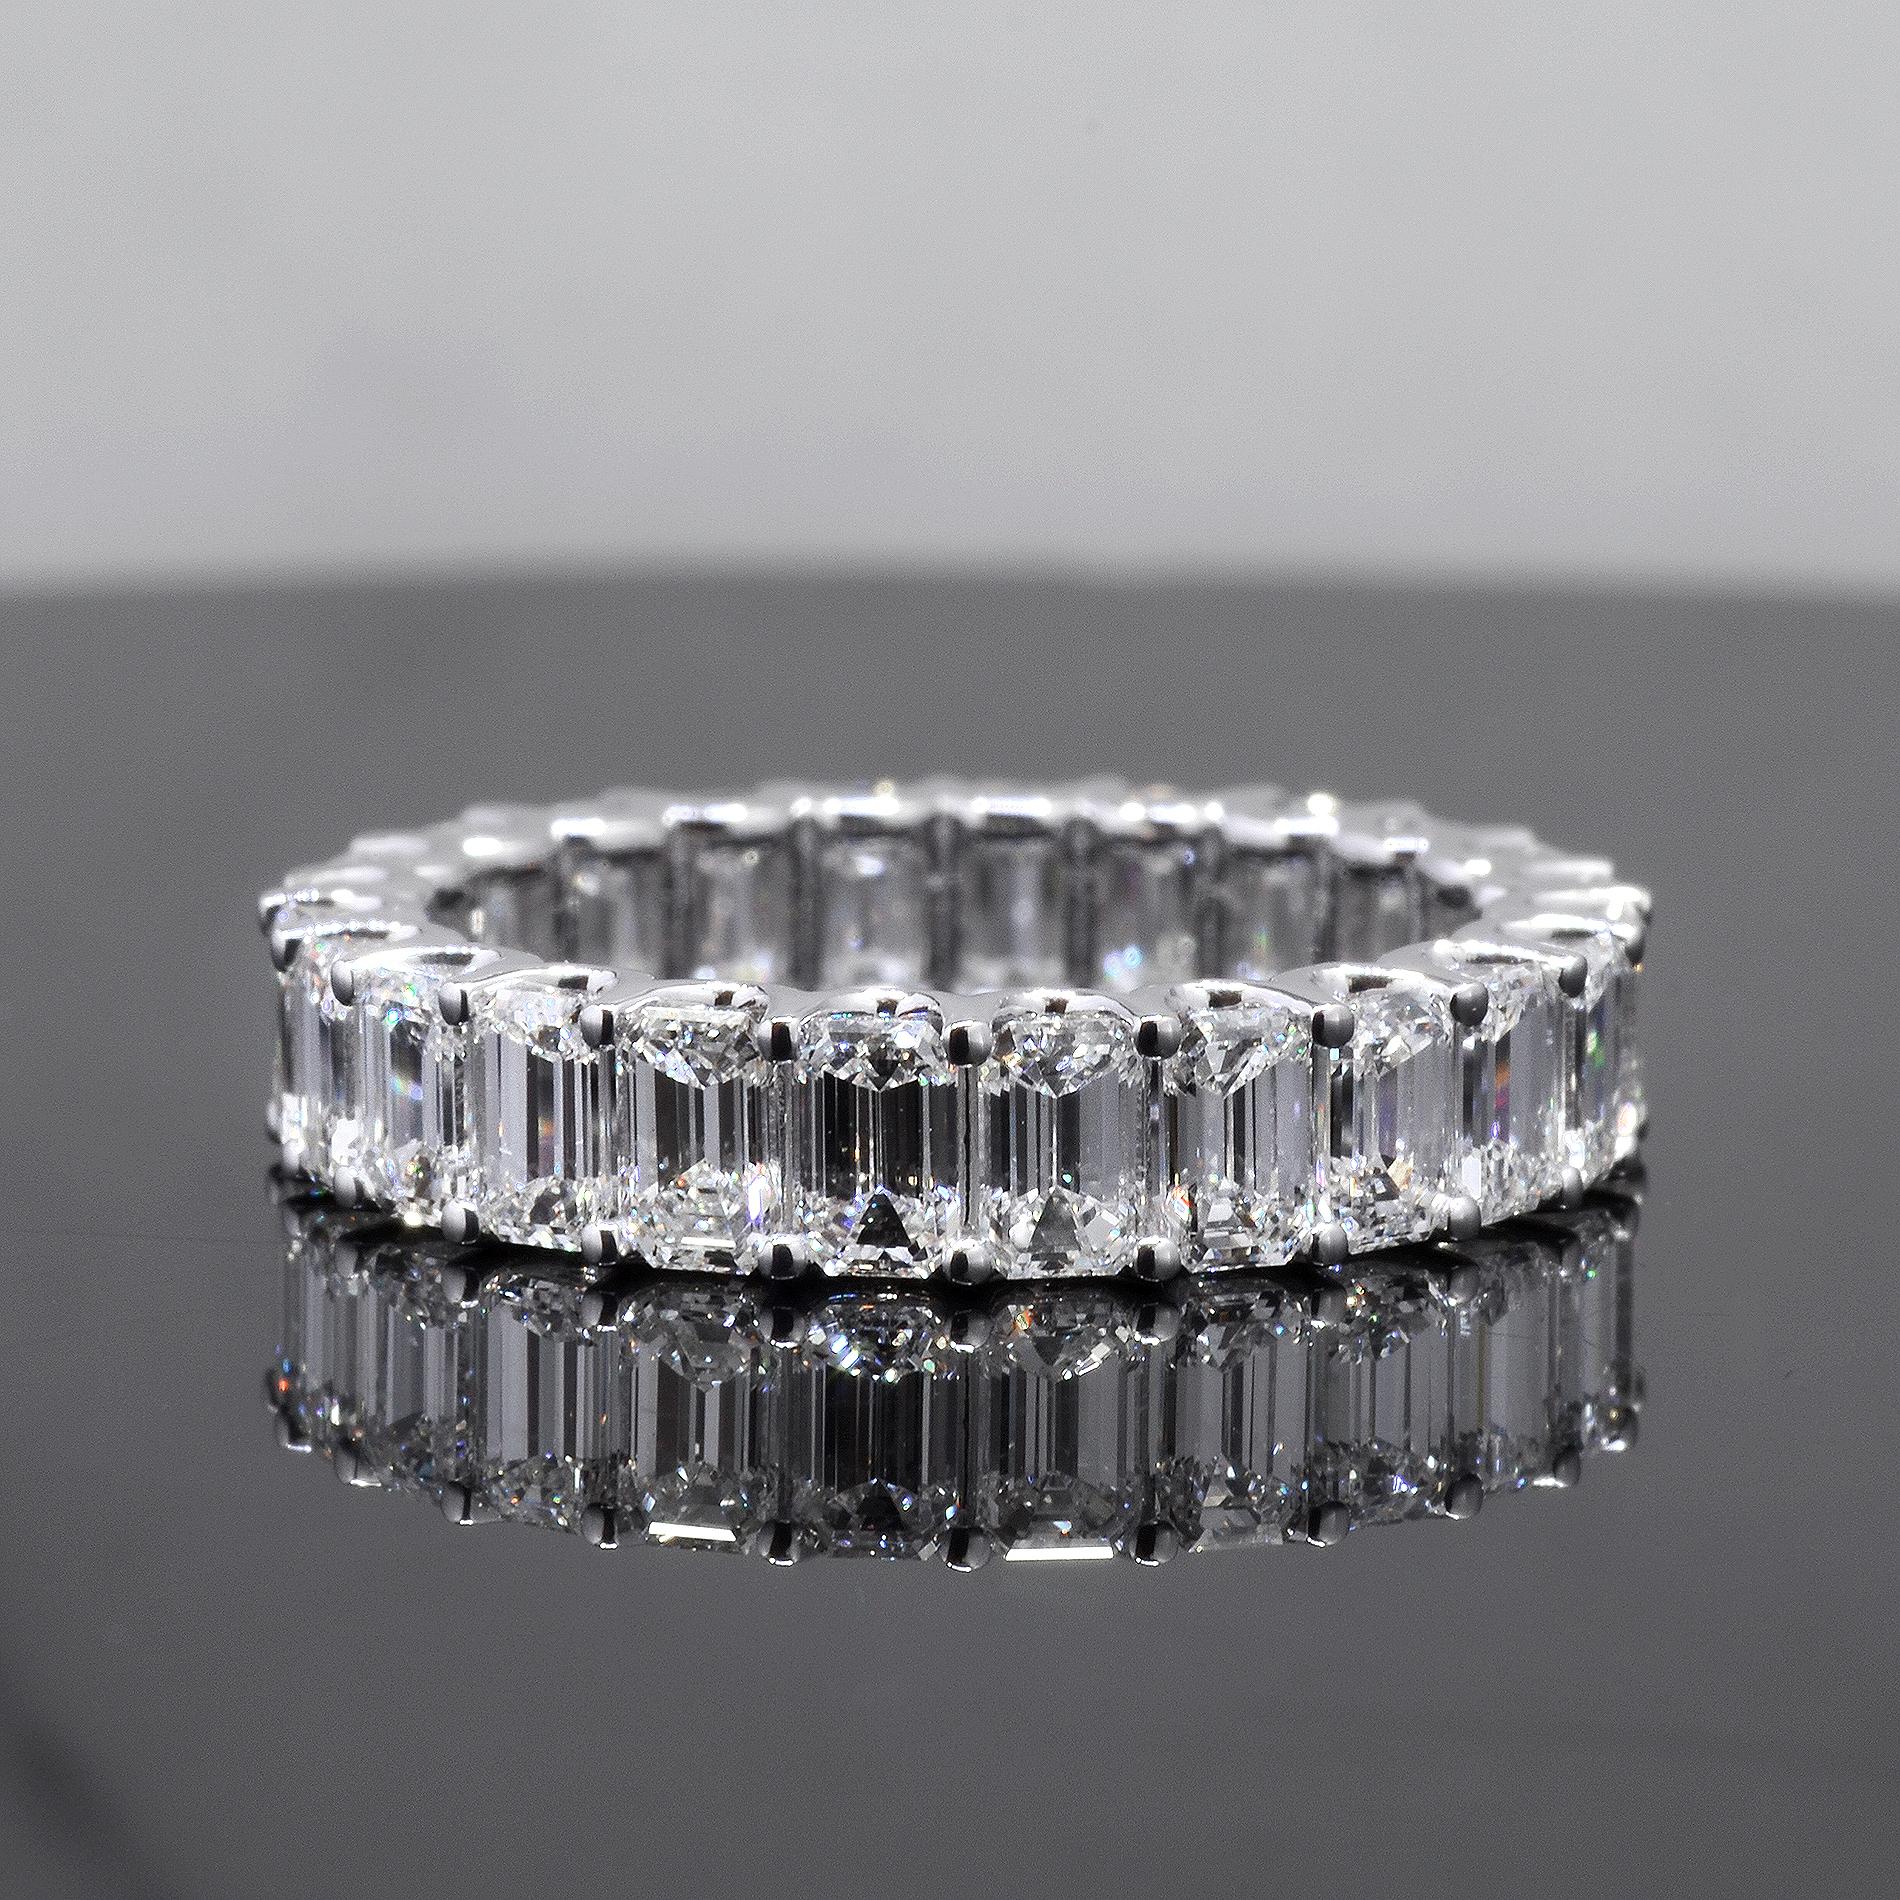 For Sale:  6 Carats Emerald Cut Eternity Band Shared Prongs F-G Color VS1 Clarity Platinum 4